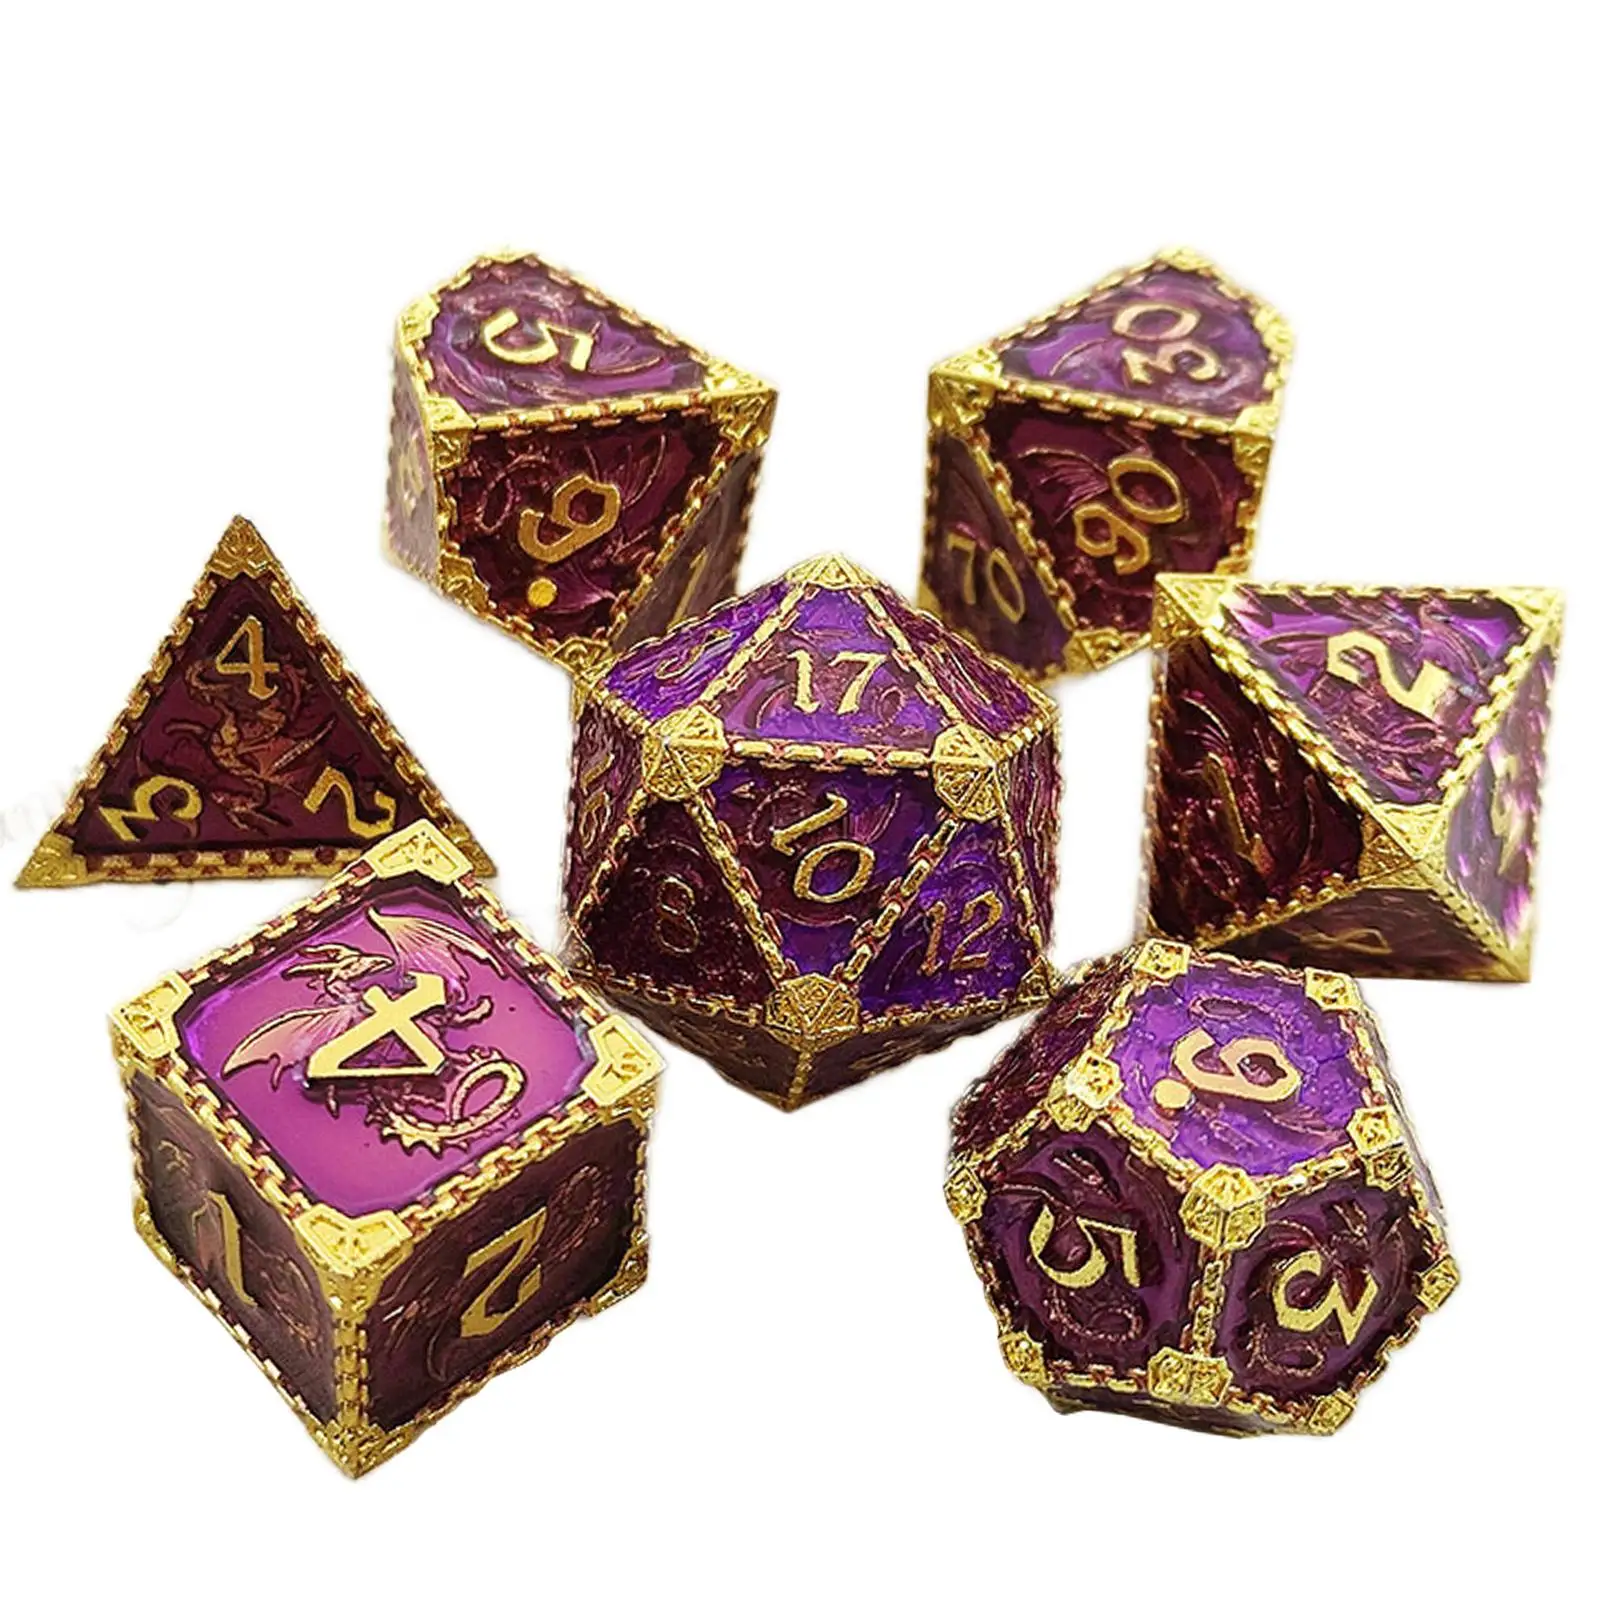 7 Pieces Polyhedral Dice Party Supply Irregular Role Playing Dice for DND RPG MTG